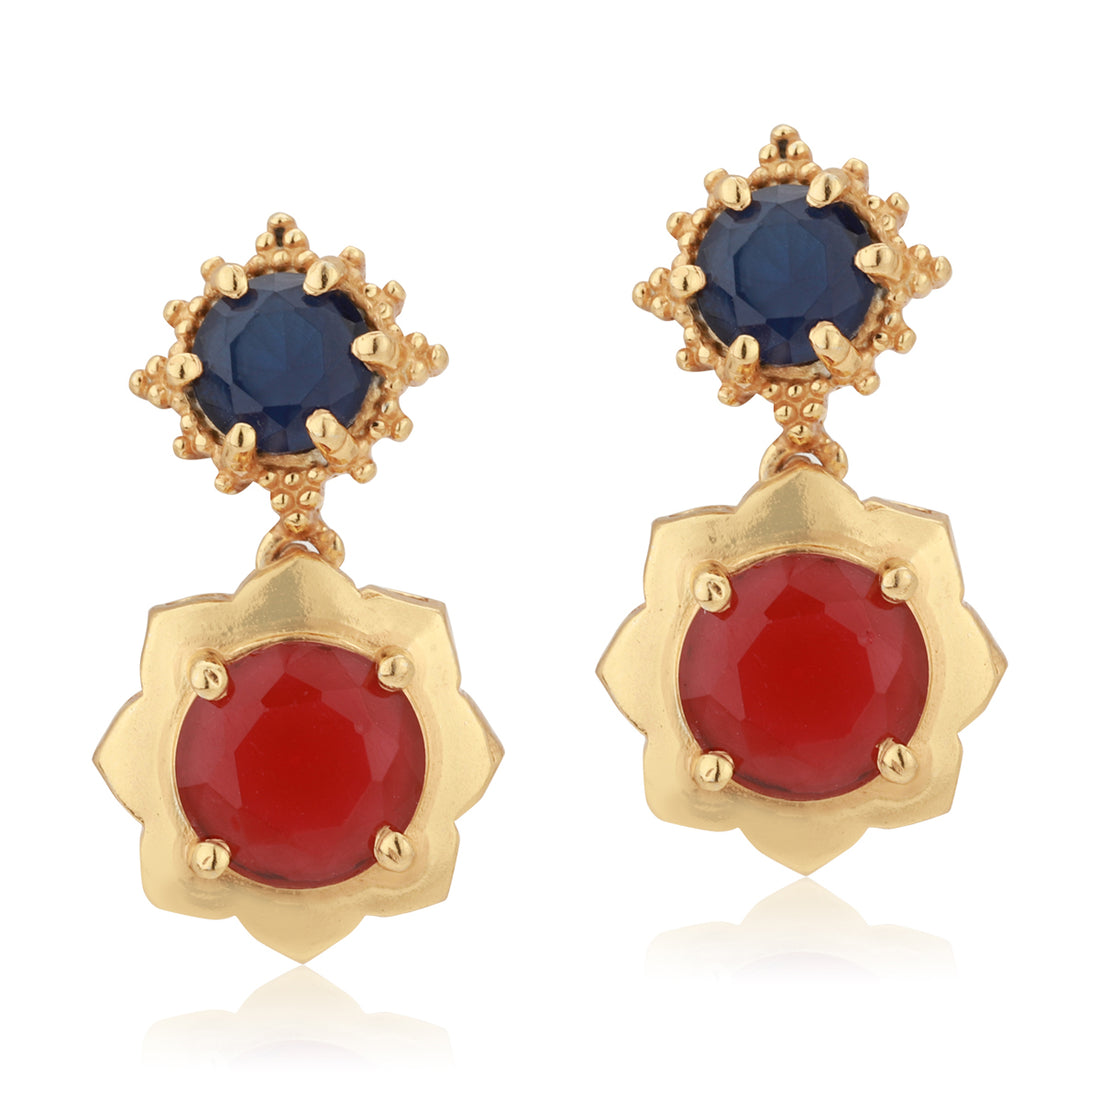 Carlton London Gold Plated Navy With Maroon Stone Floral Drop Earring For Women